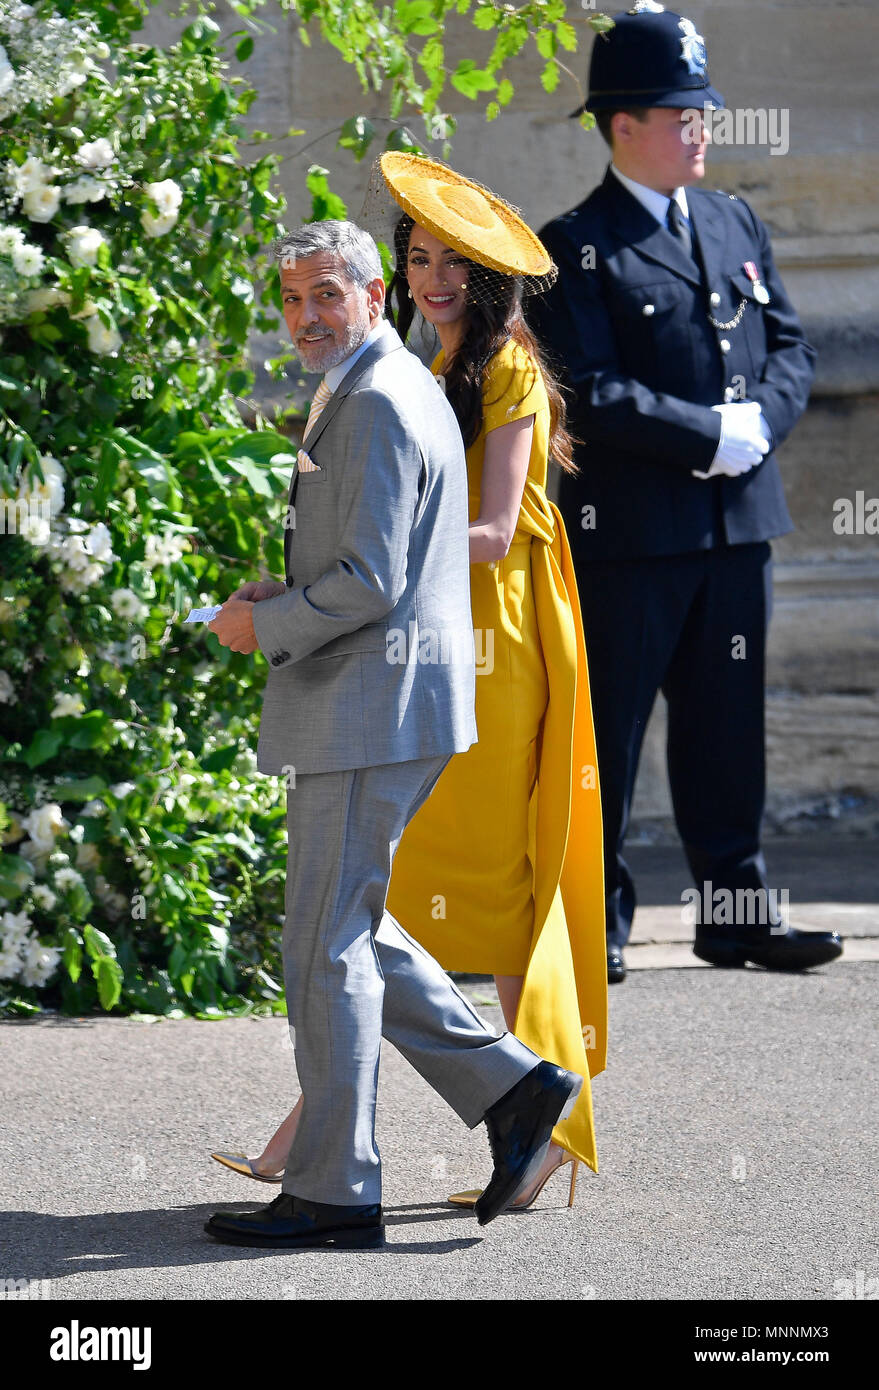 Amal Clooney and George Clooney arrive at St George's Chapel in Windsor Castle for the wedding of Prince Harry and Meghan Markle. Stock Photo